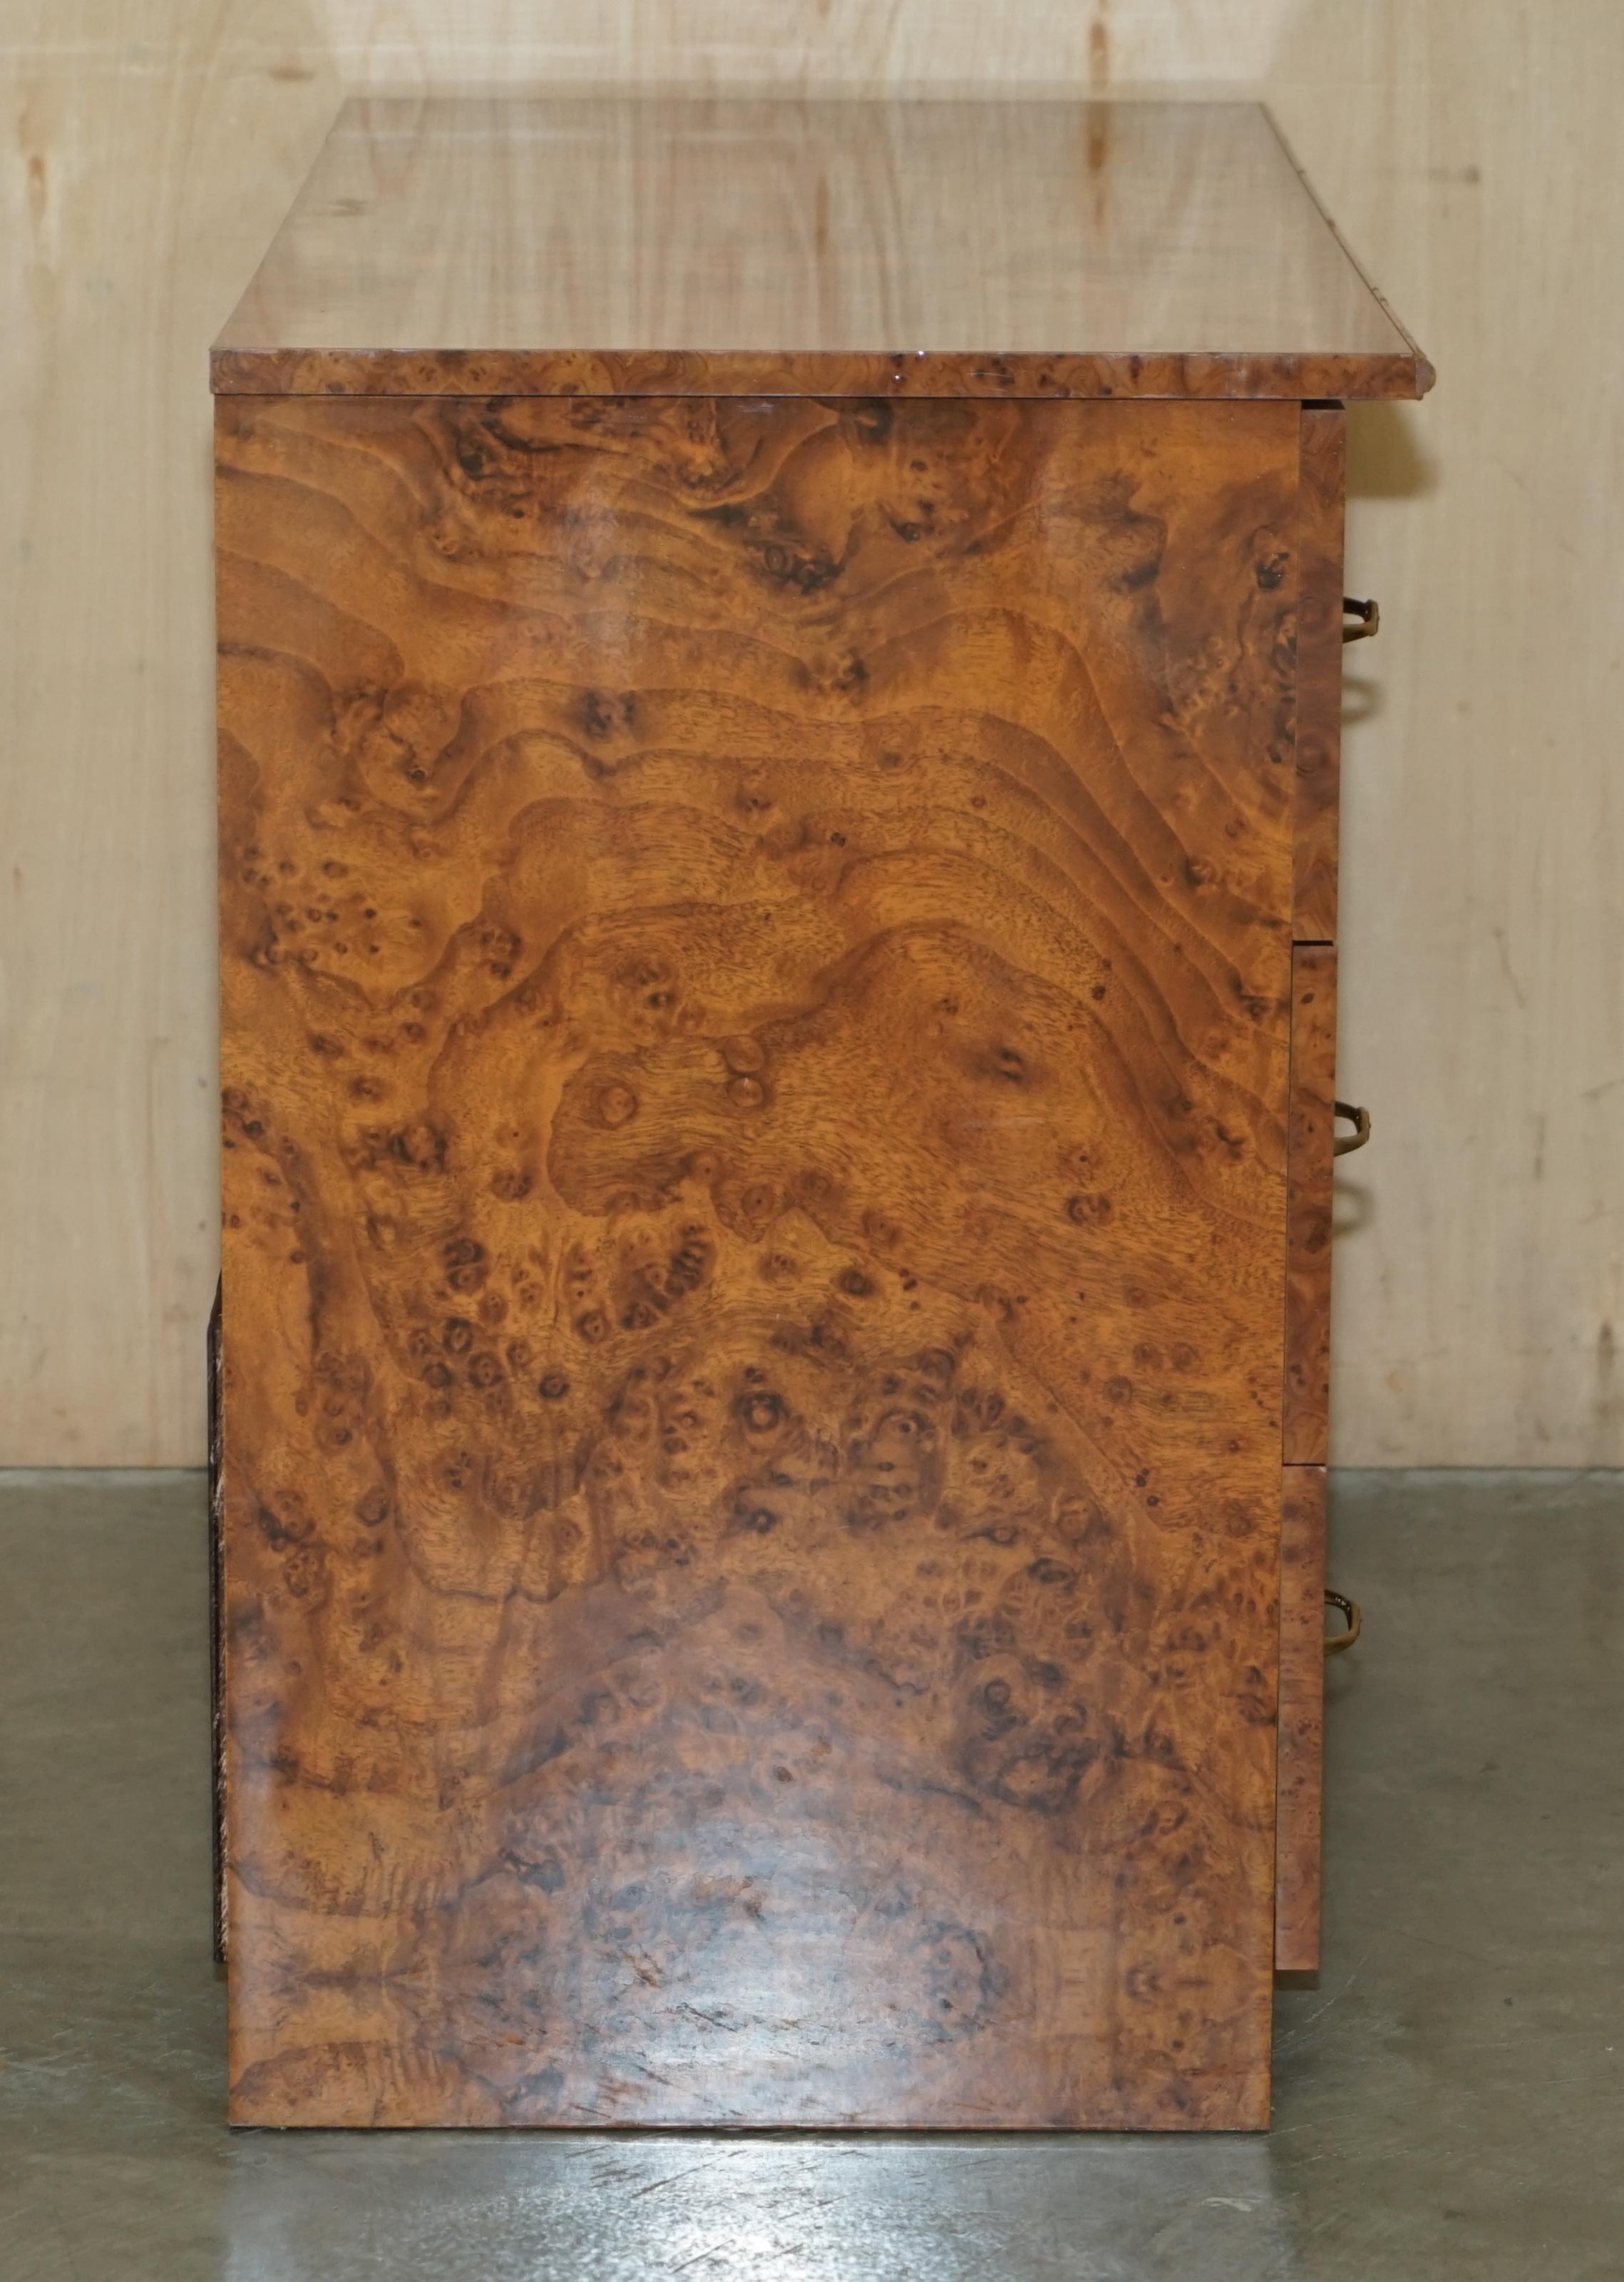 NICE ViNTAGE MADE IN ITALY BURR WALNUT VENEER CHEST OF DRAWERS PART OF A SUITE im Angebot 10